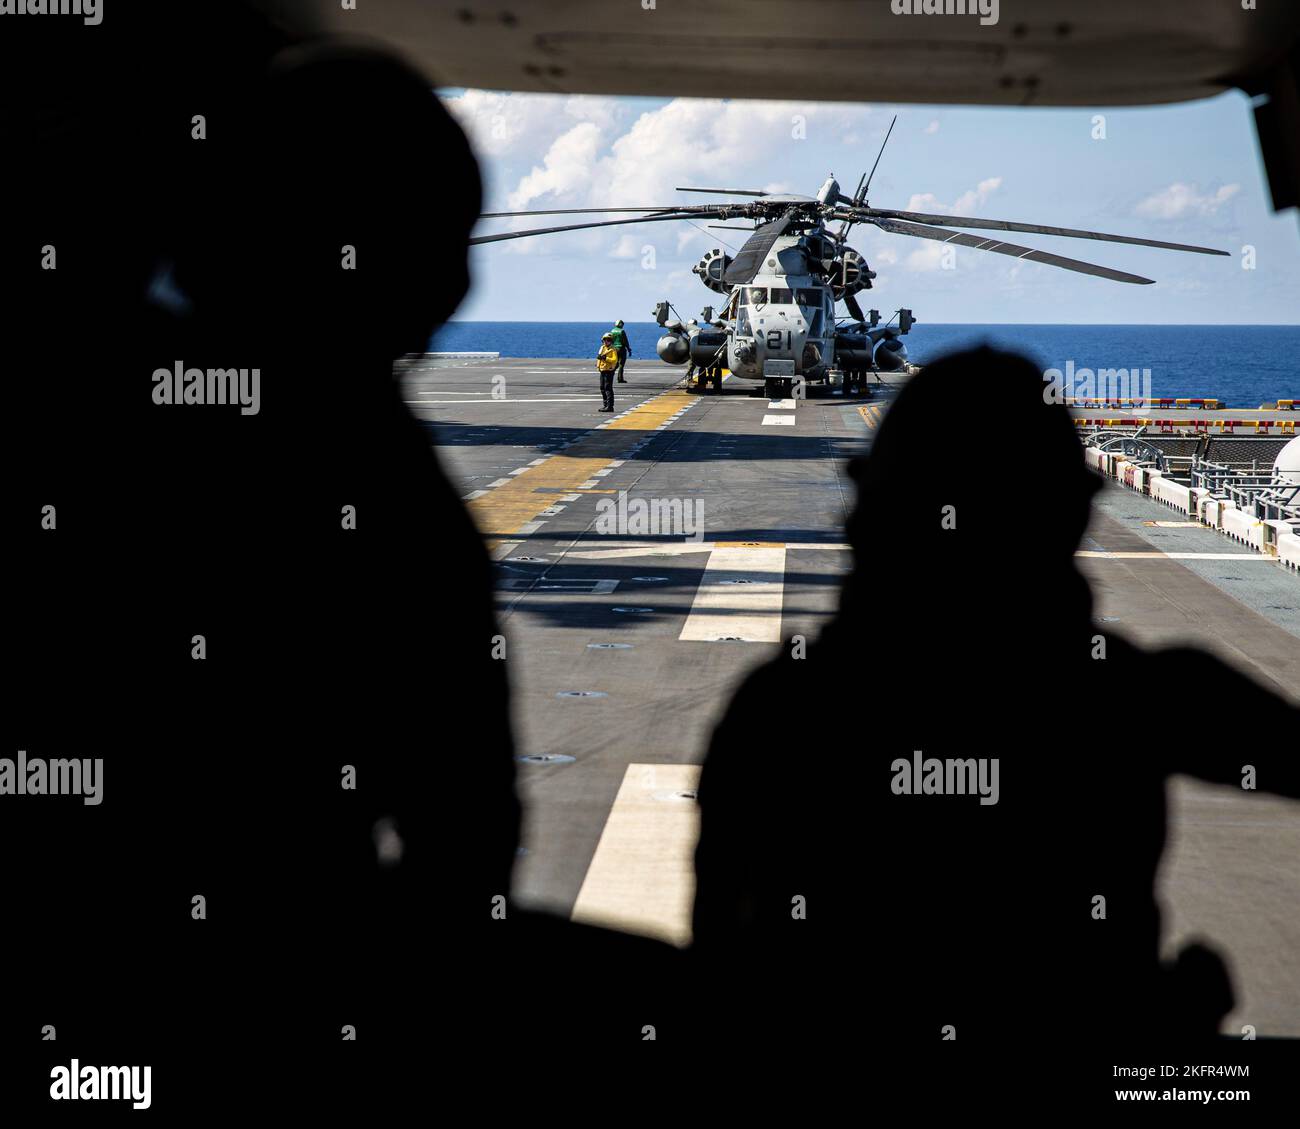 U.S. Marines with Marine Medium Tiltrotor Squadron (VMM) 262 (Rein.), 31st Marine Expeditionary Unit, prepare for flight operations inan MV-22B Osprey during KAMANDAG 6 aboard Amphibious Assault Ship USS Tripoli (LHA-7), off the coast of the Philippines, Oct. 2, 2022.  KAMANDAG is an annual bilateral exercise between the Armed Forces of the Philippines and U.S. military designed to strengthen interoperability, capabilities, trust, and cooperation built over decades shared experiences. Stock Photo